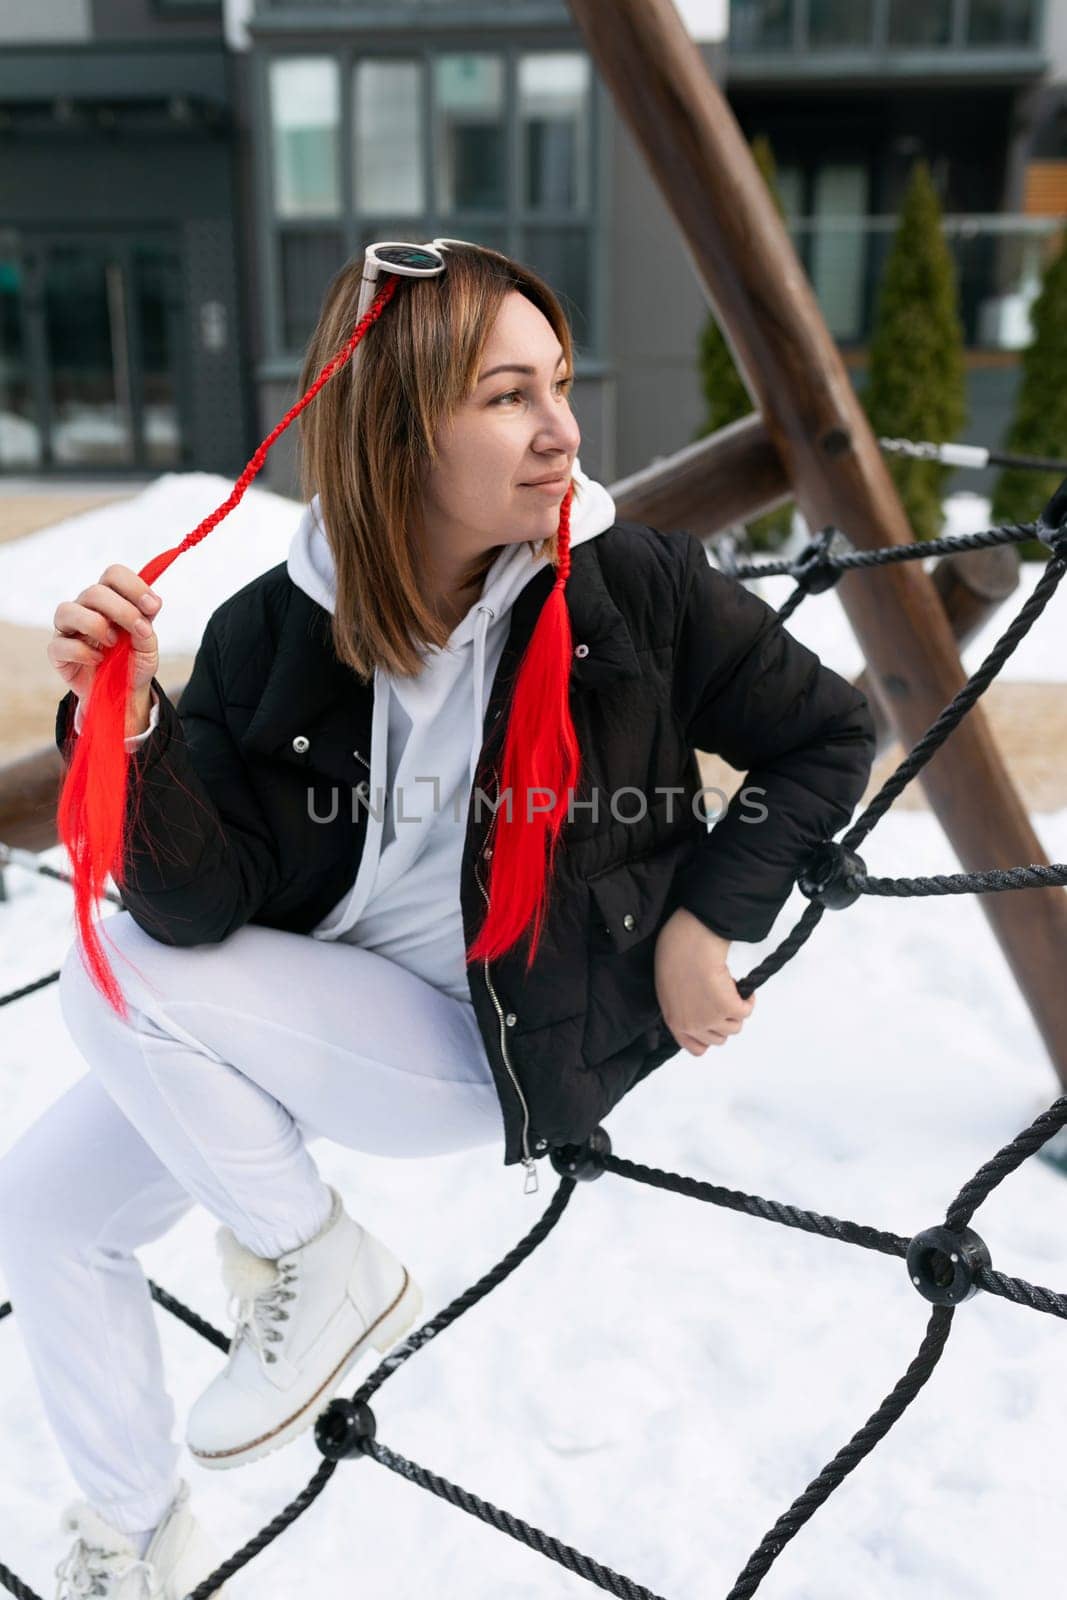 European woman in winter clothes walking on the playground.